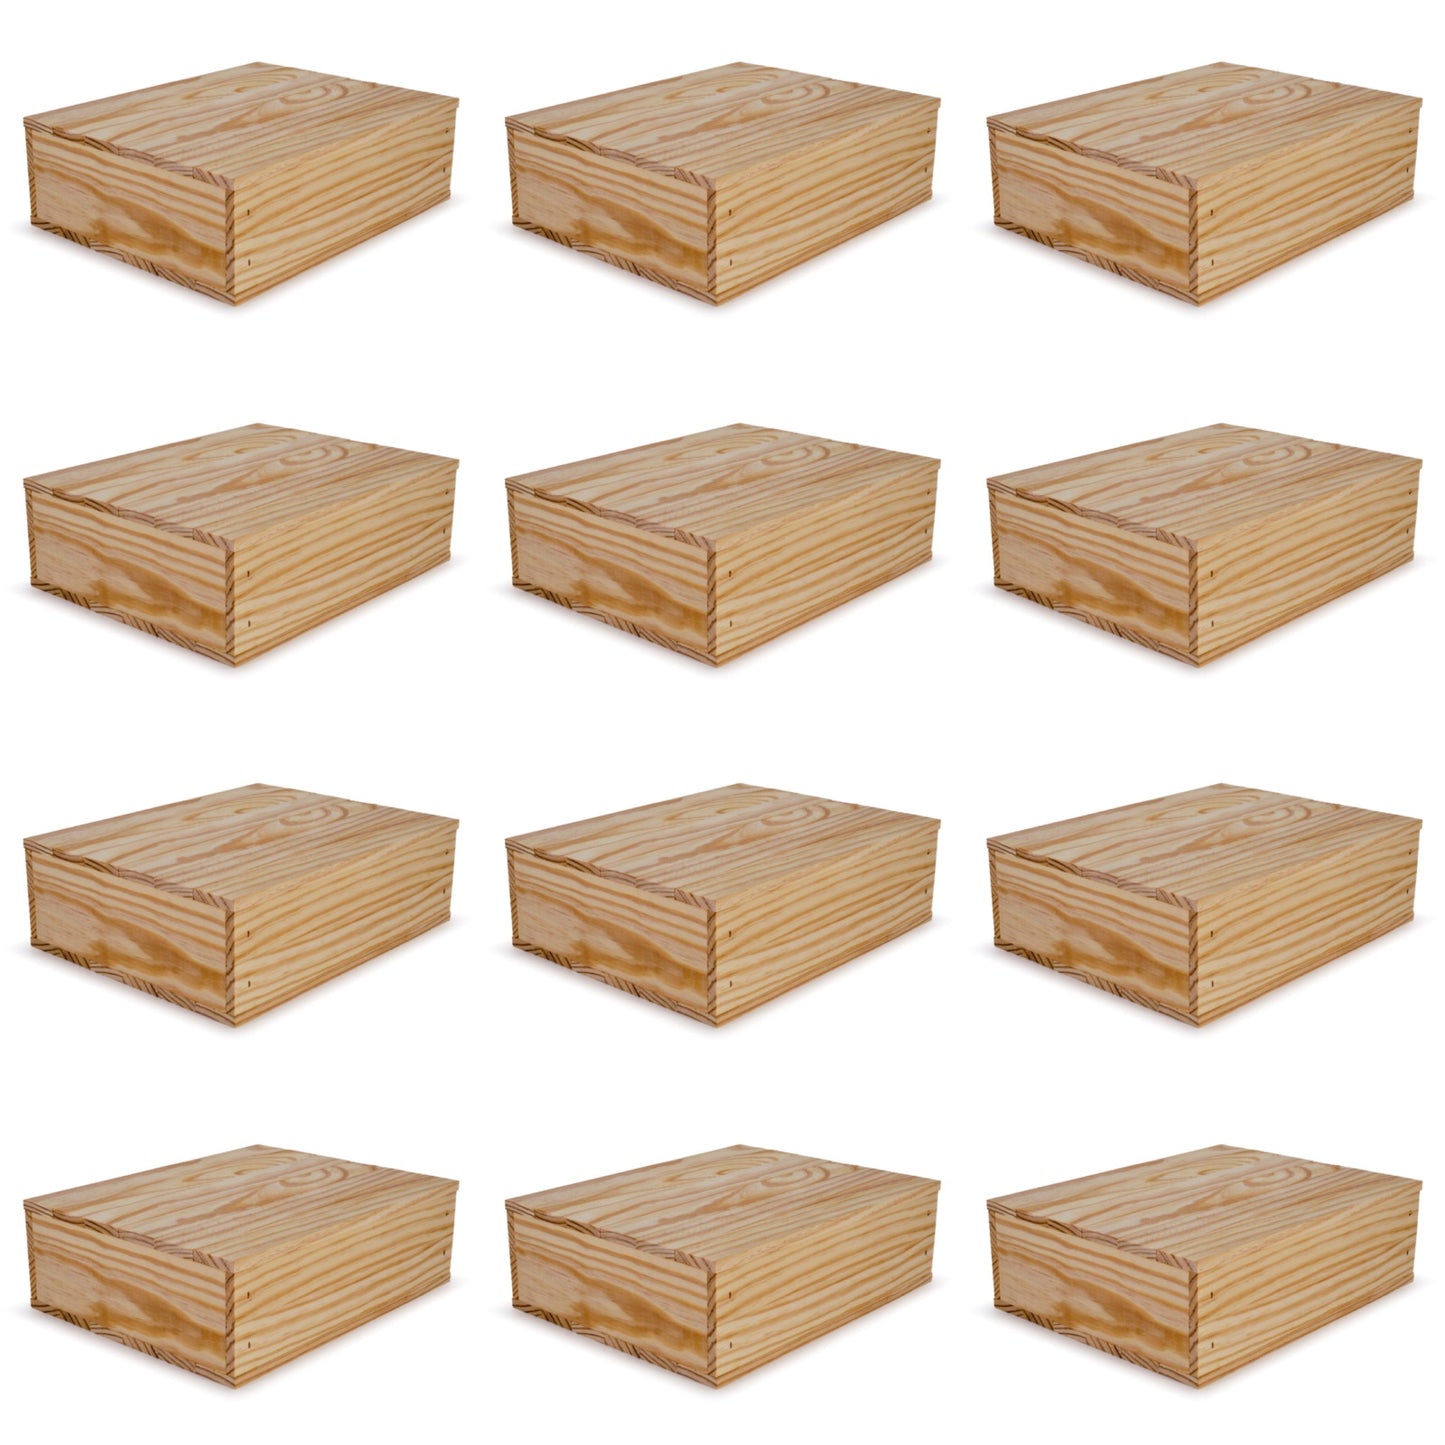 12 Small wooden crates with lid 12x9.75x3.5